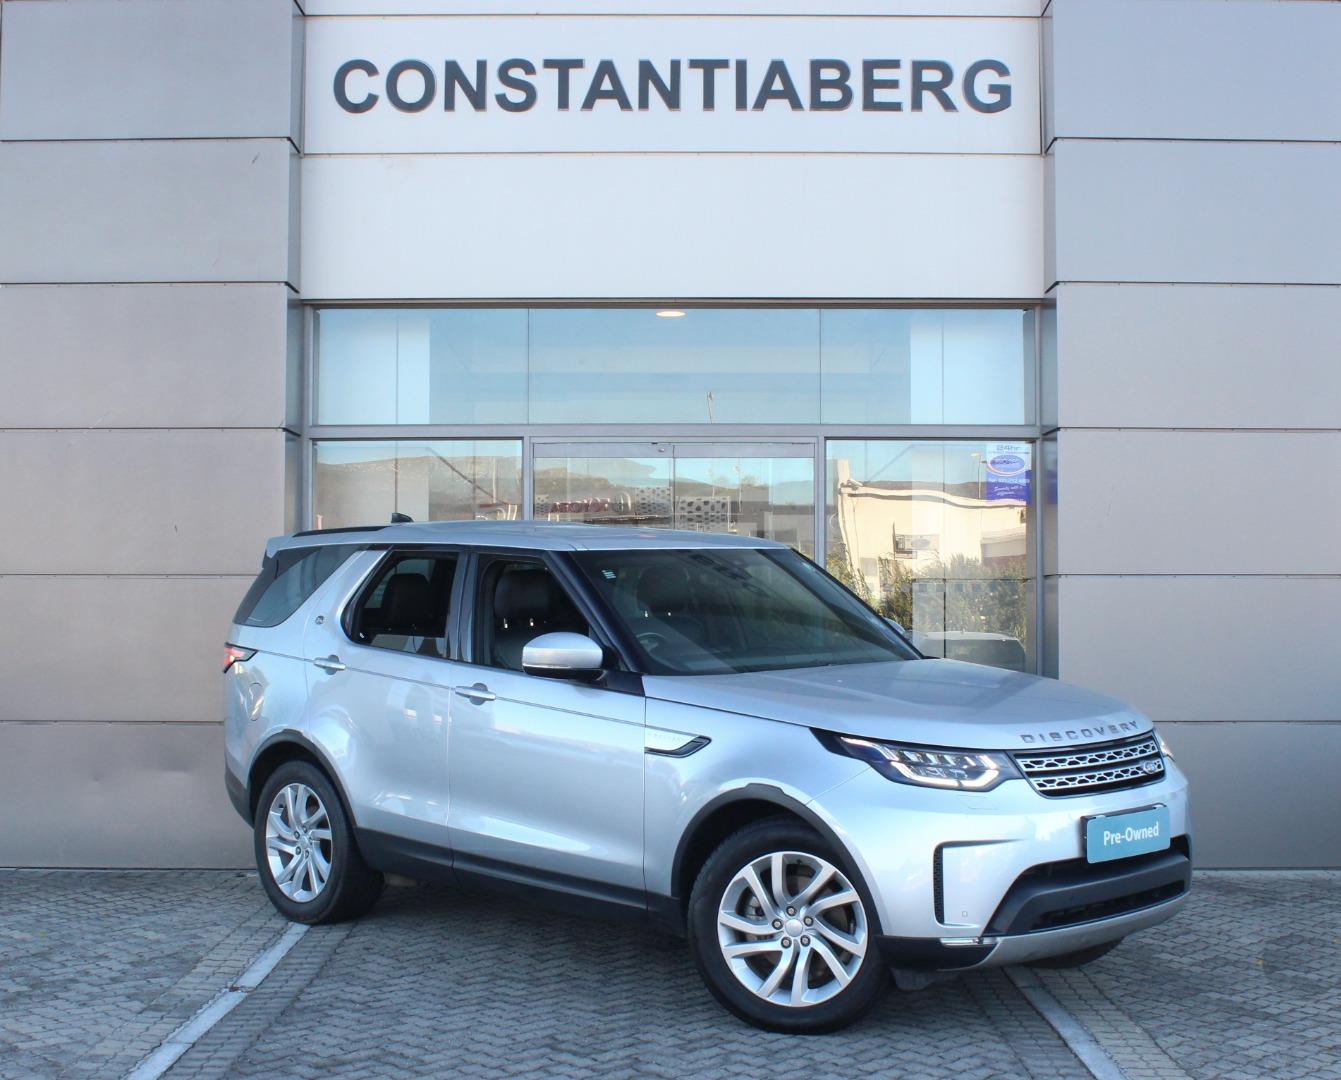 2019 Land Rover Discovery  for sale - 125483